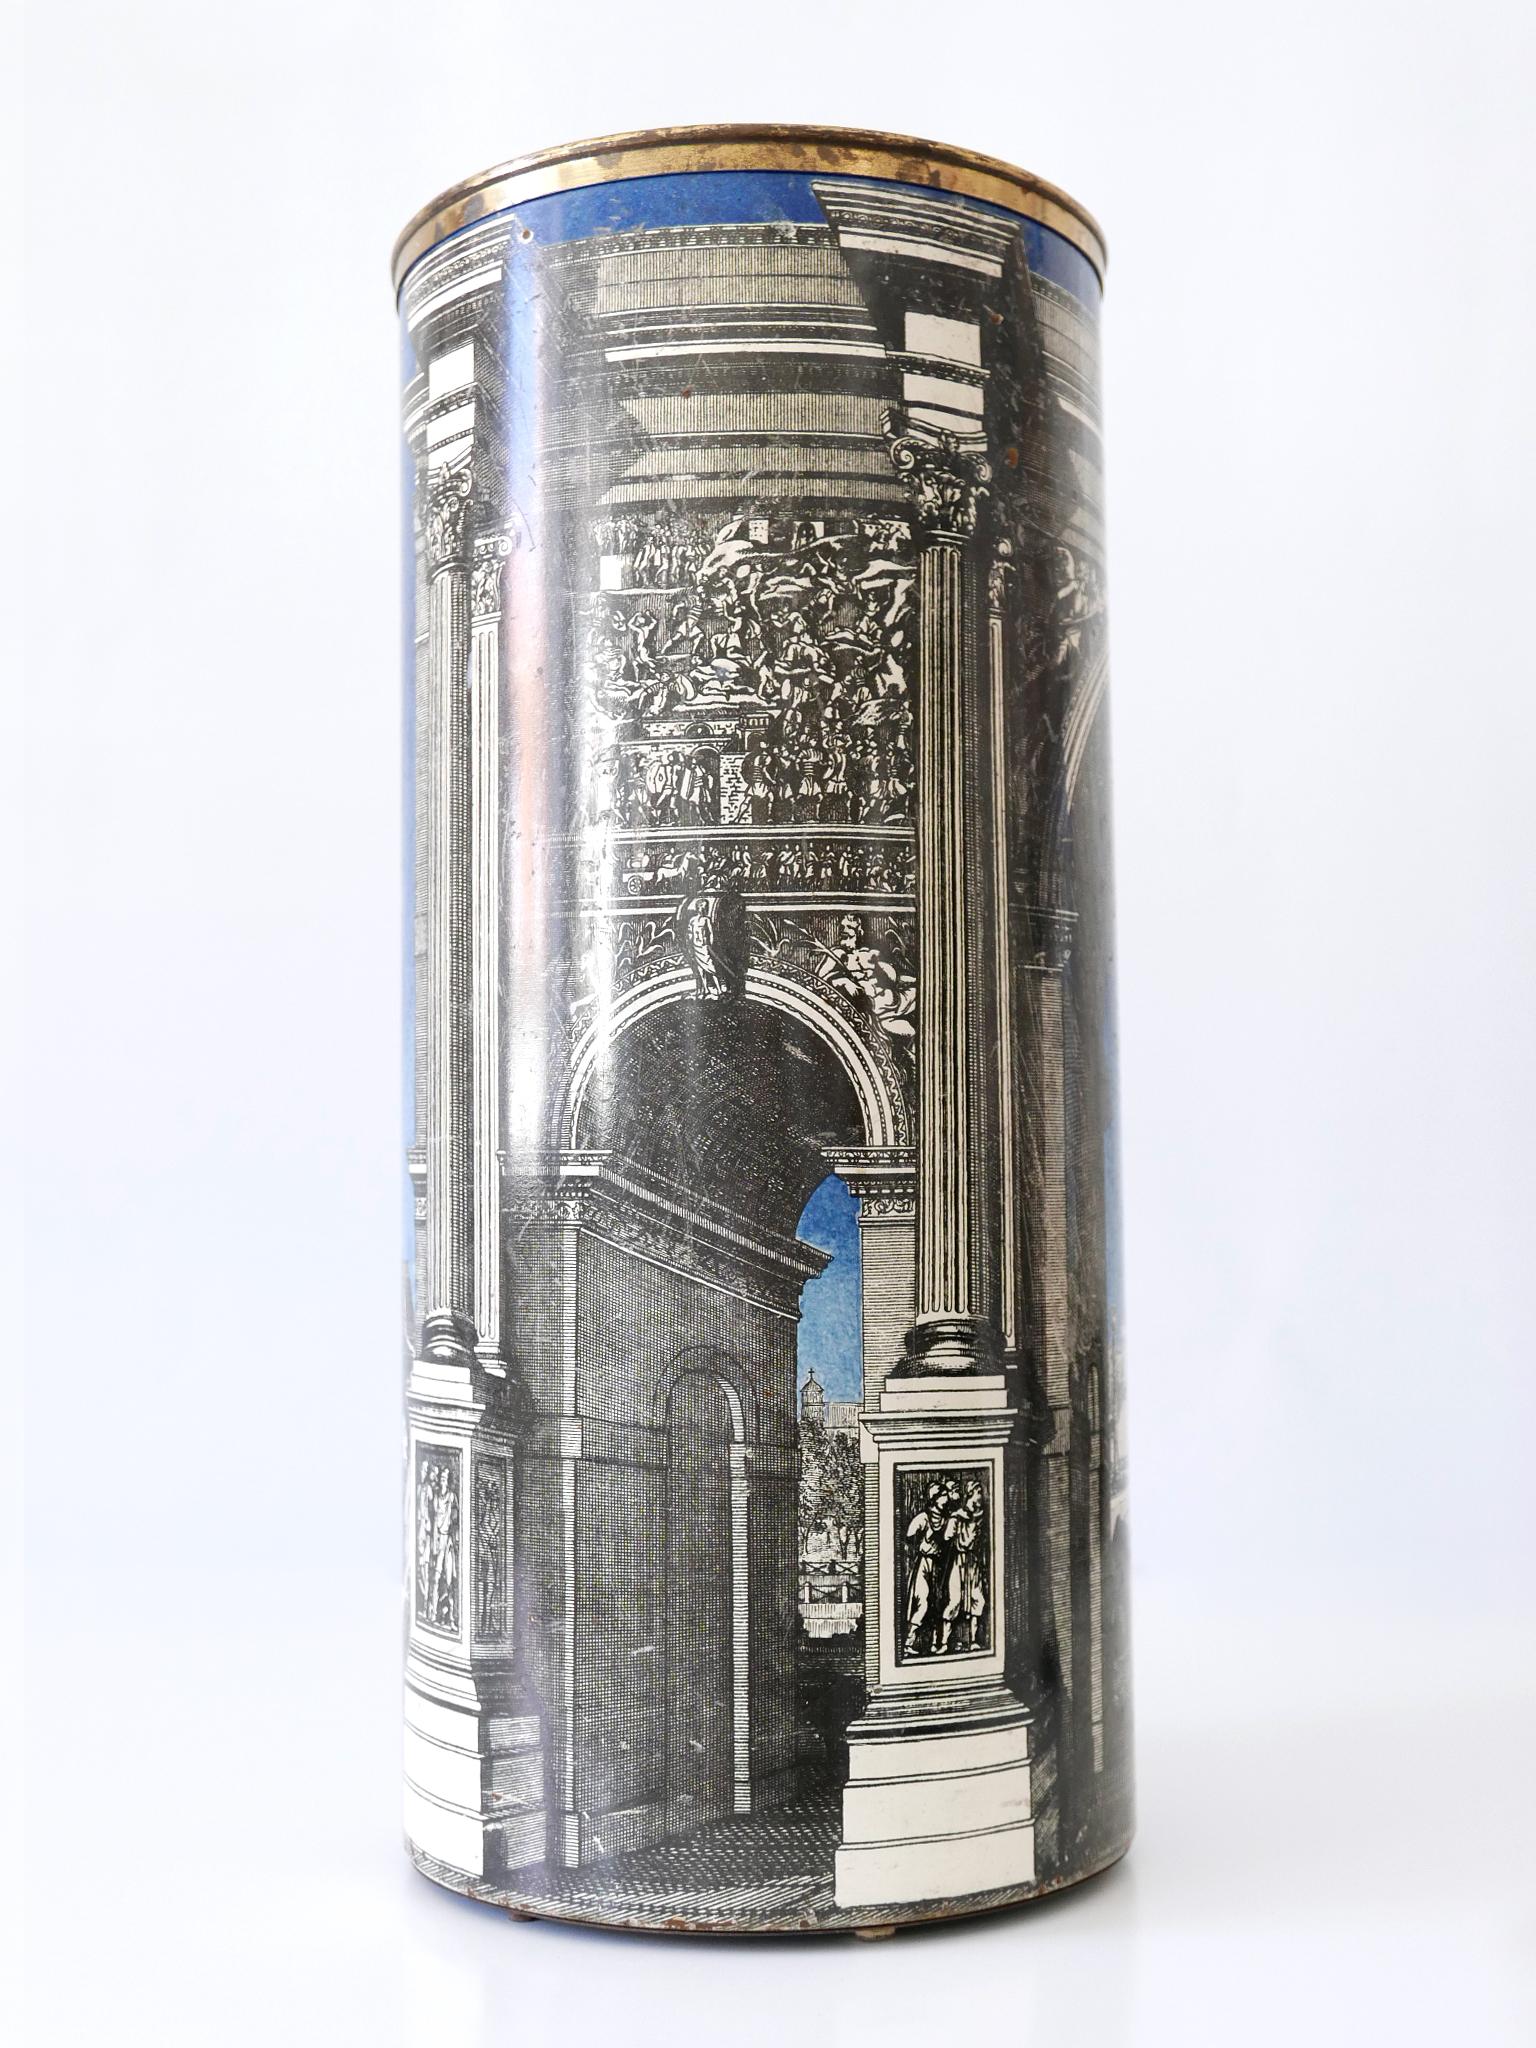 Early Mid-Century Modern 'Roman Arch' Umbrella Stand by Piero Fornasetti 1950s For Sale 7